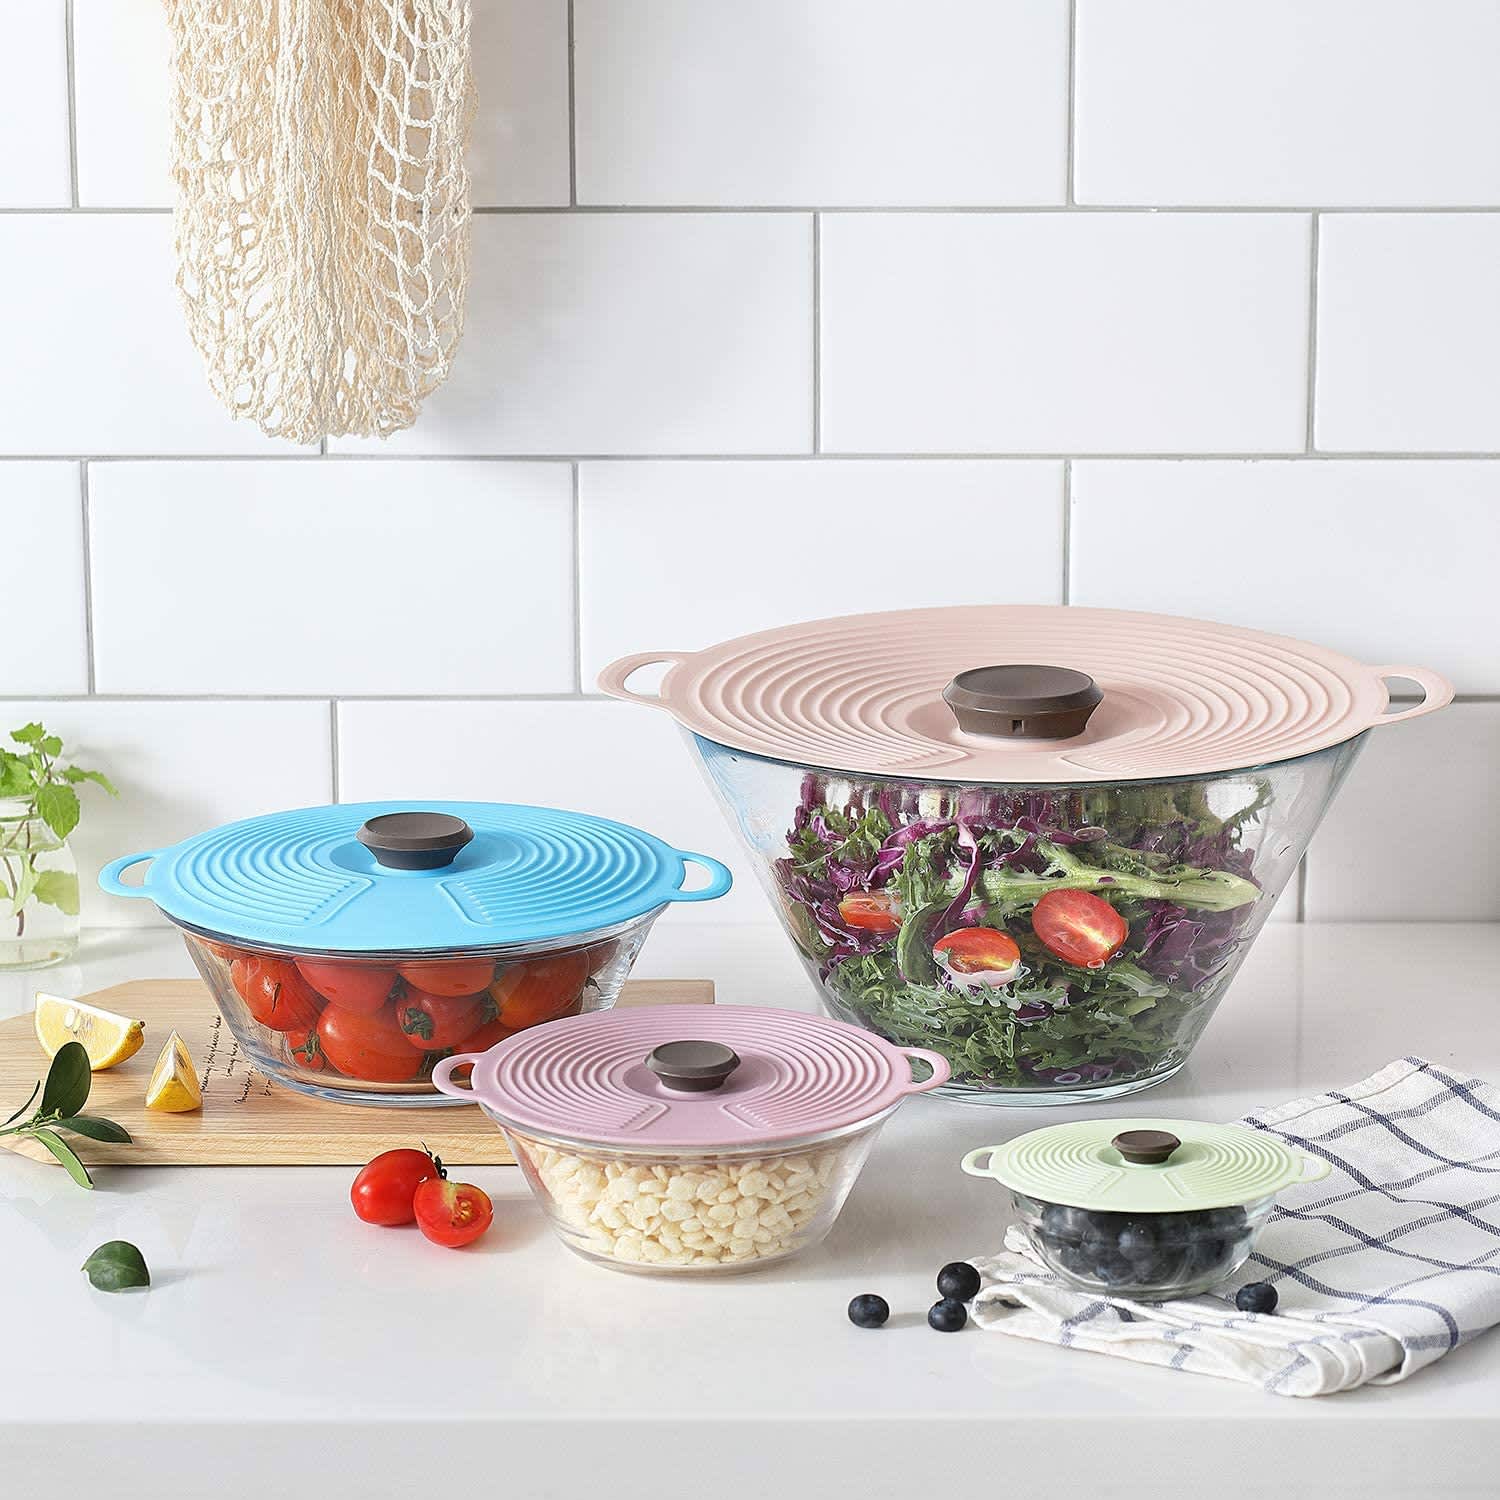 The Lids Turn Any Dish Into an Airtight Food Storage Container: Guanci Lids